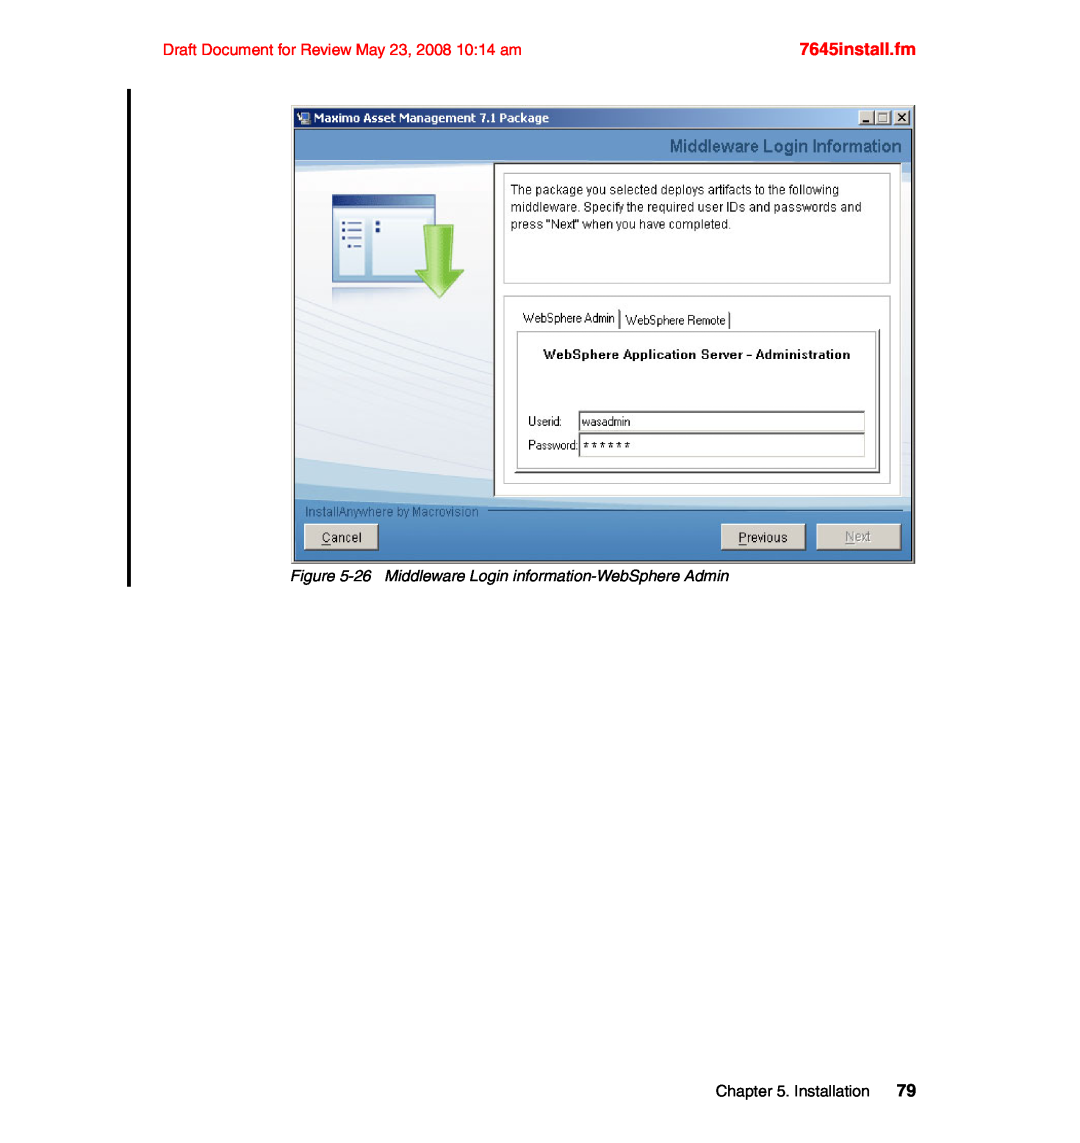 IBM SG24-7645-00 manual 7645install.fm, Draft Document for Review May 23, 2008 10:14 am 